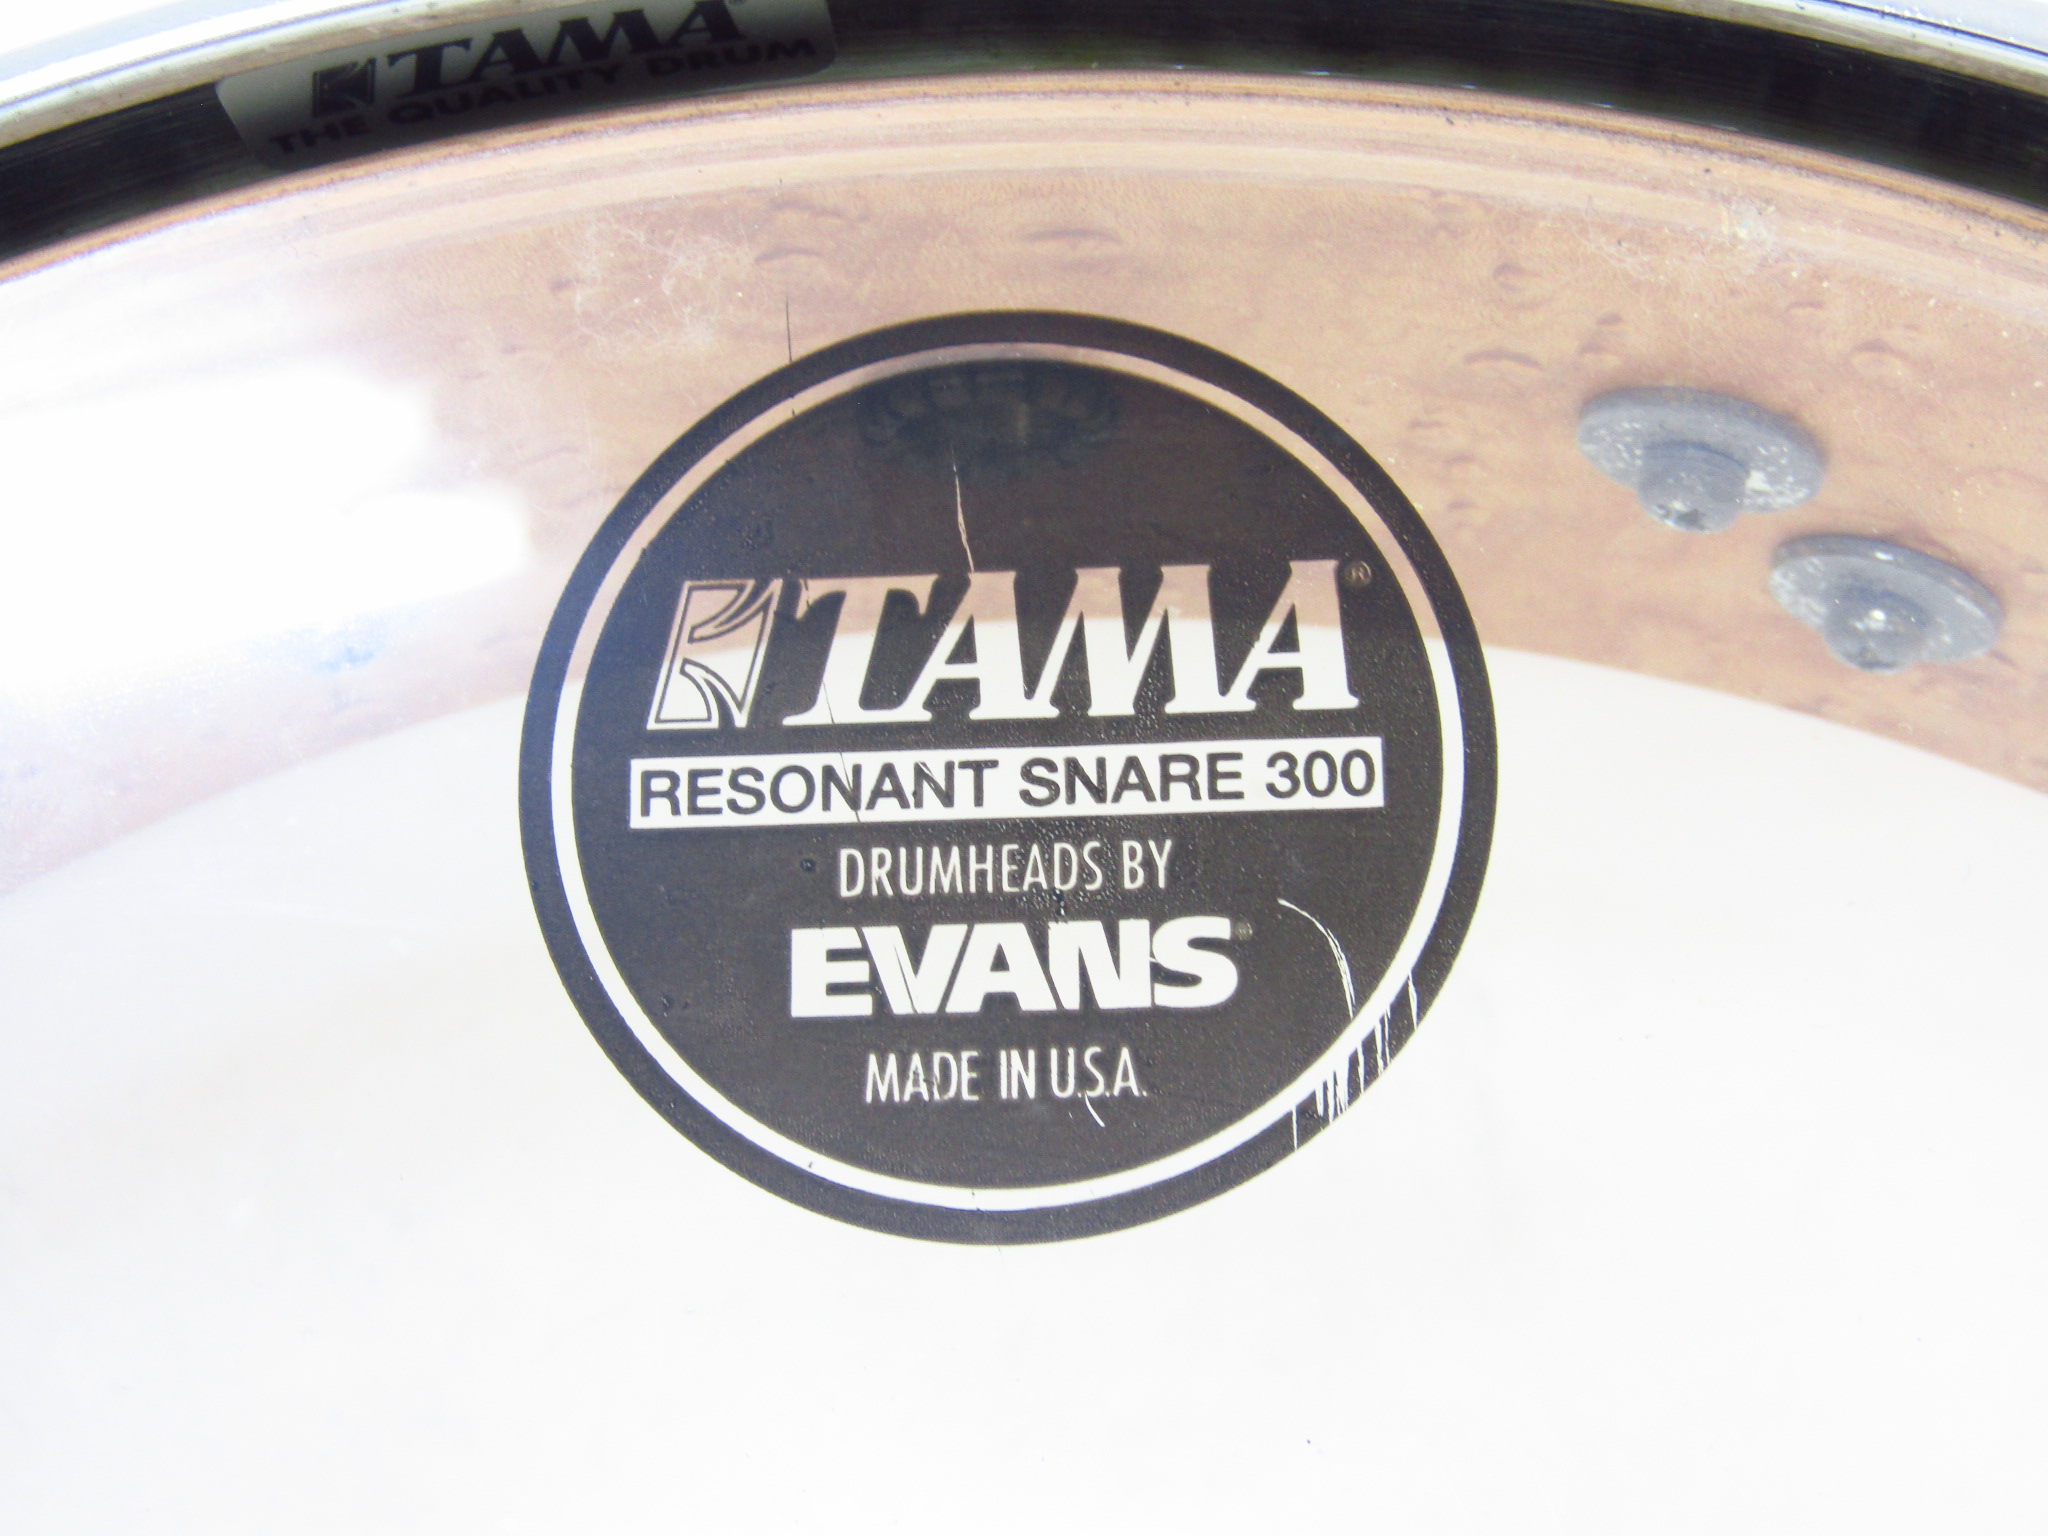 TAMA AM 2325BE snare drum 14×3.5 VG4182